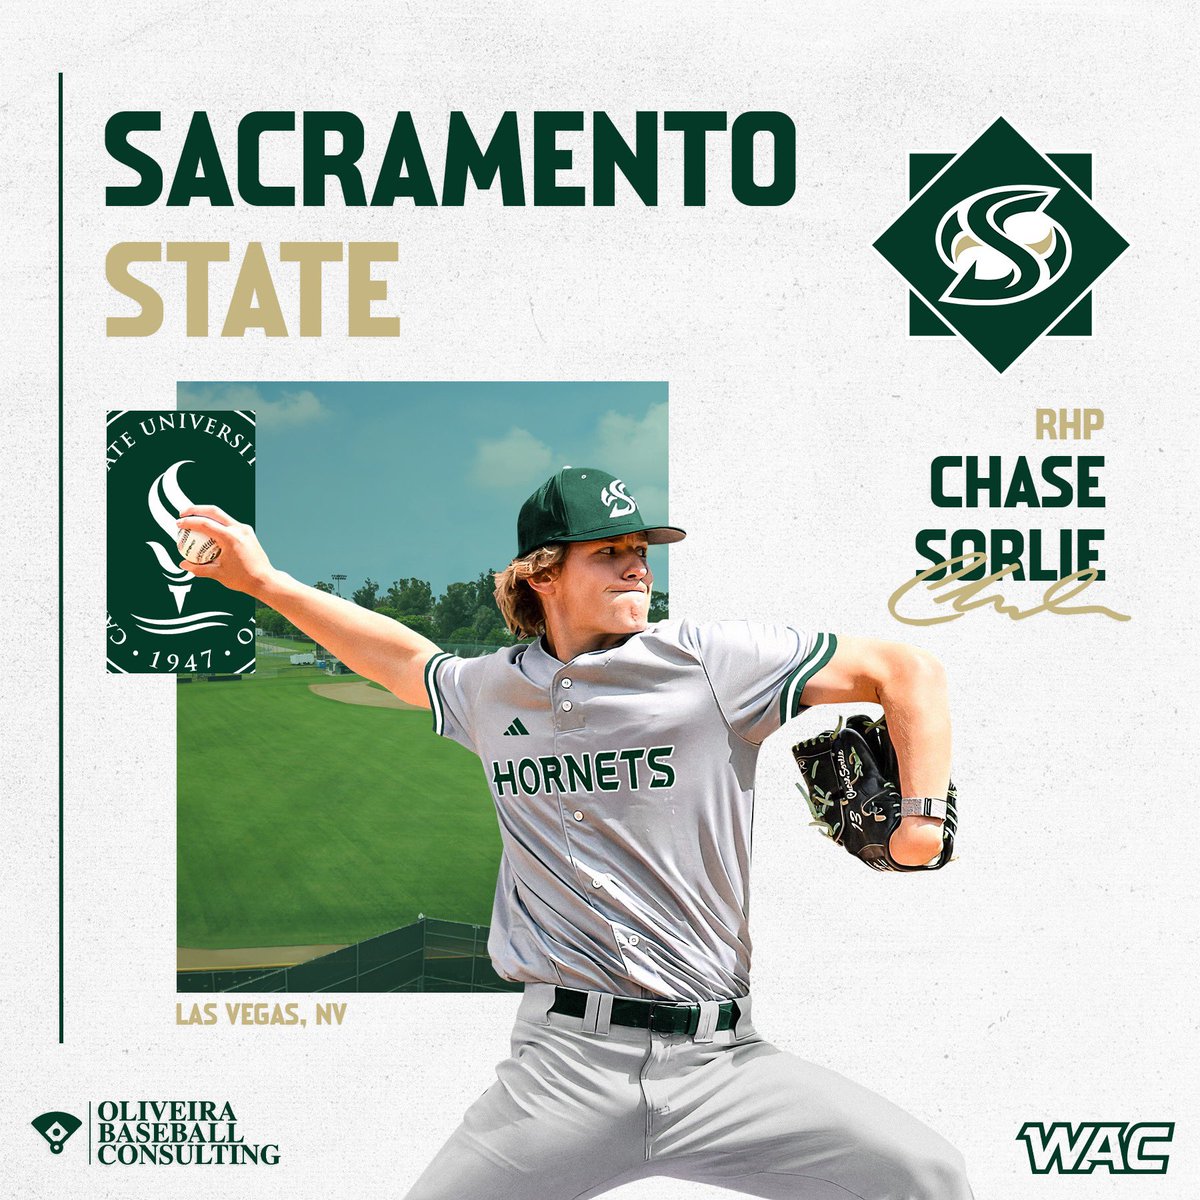 Congrats to Chase Sorlie on his commitment to Sacramento State University. Big arm from Vegas heading to pitch for the Hornets. Excited for the Sorlie family! #SacState #StingersUp #WAC #Committed #OBC